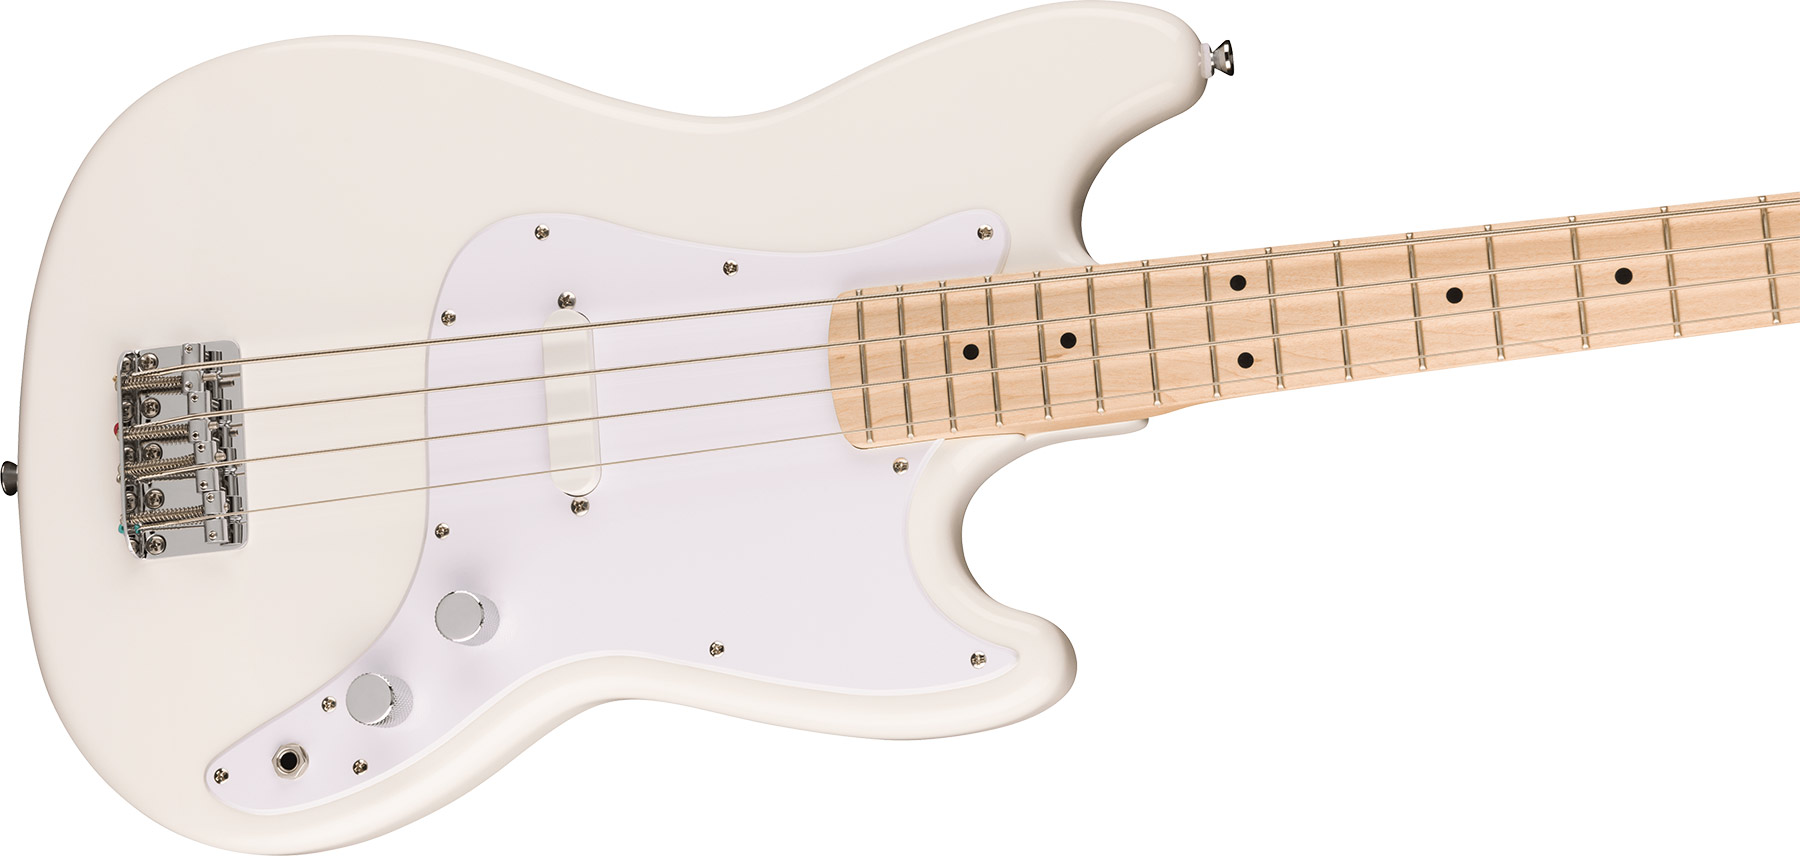 Squier Bronco Bass Sonic Mn - Arctic White - Solidbody E-bass - Variation 2